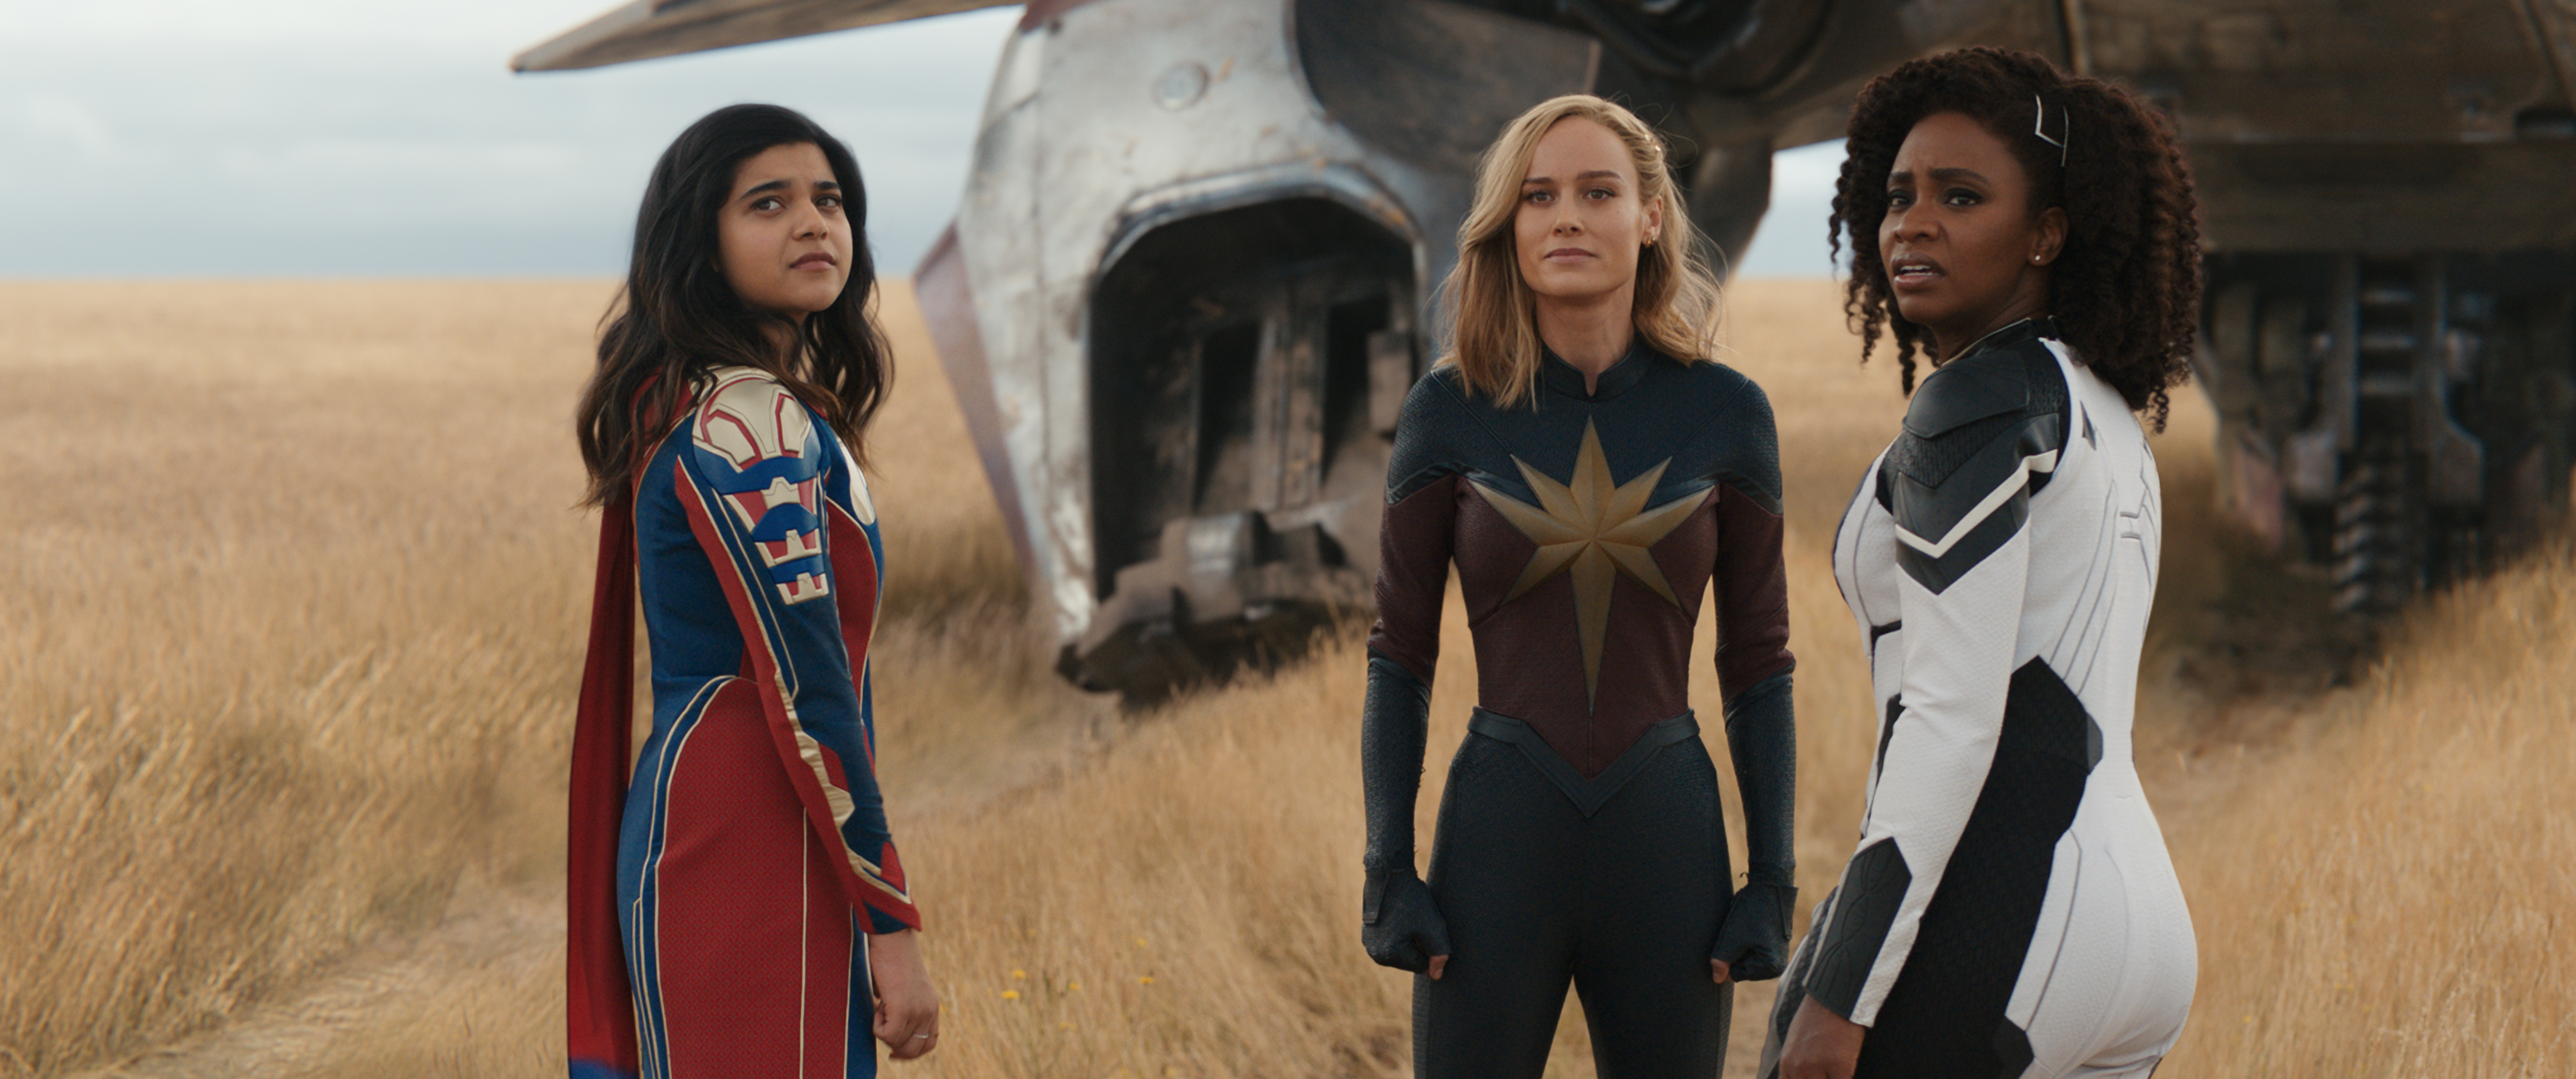 From left to right, Iman Vellani as Ms. Marvel or Kamala Khan, Brie Larson as Captain Marvel or Carol Danvers, and Teyonah Parris as Captain Monica Rambeau, in the movie The Marvels.